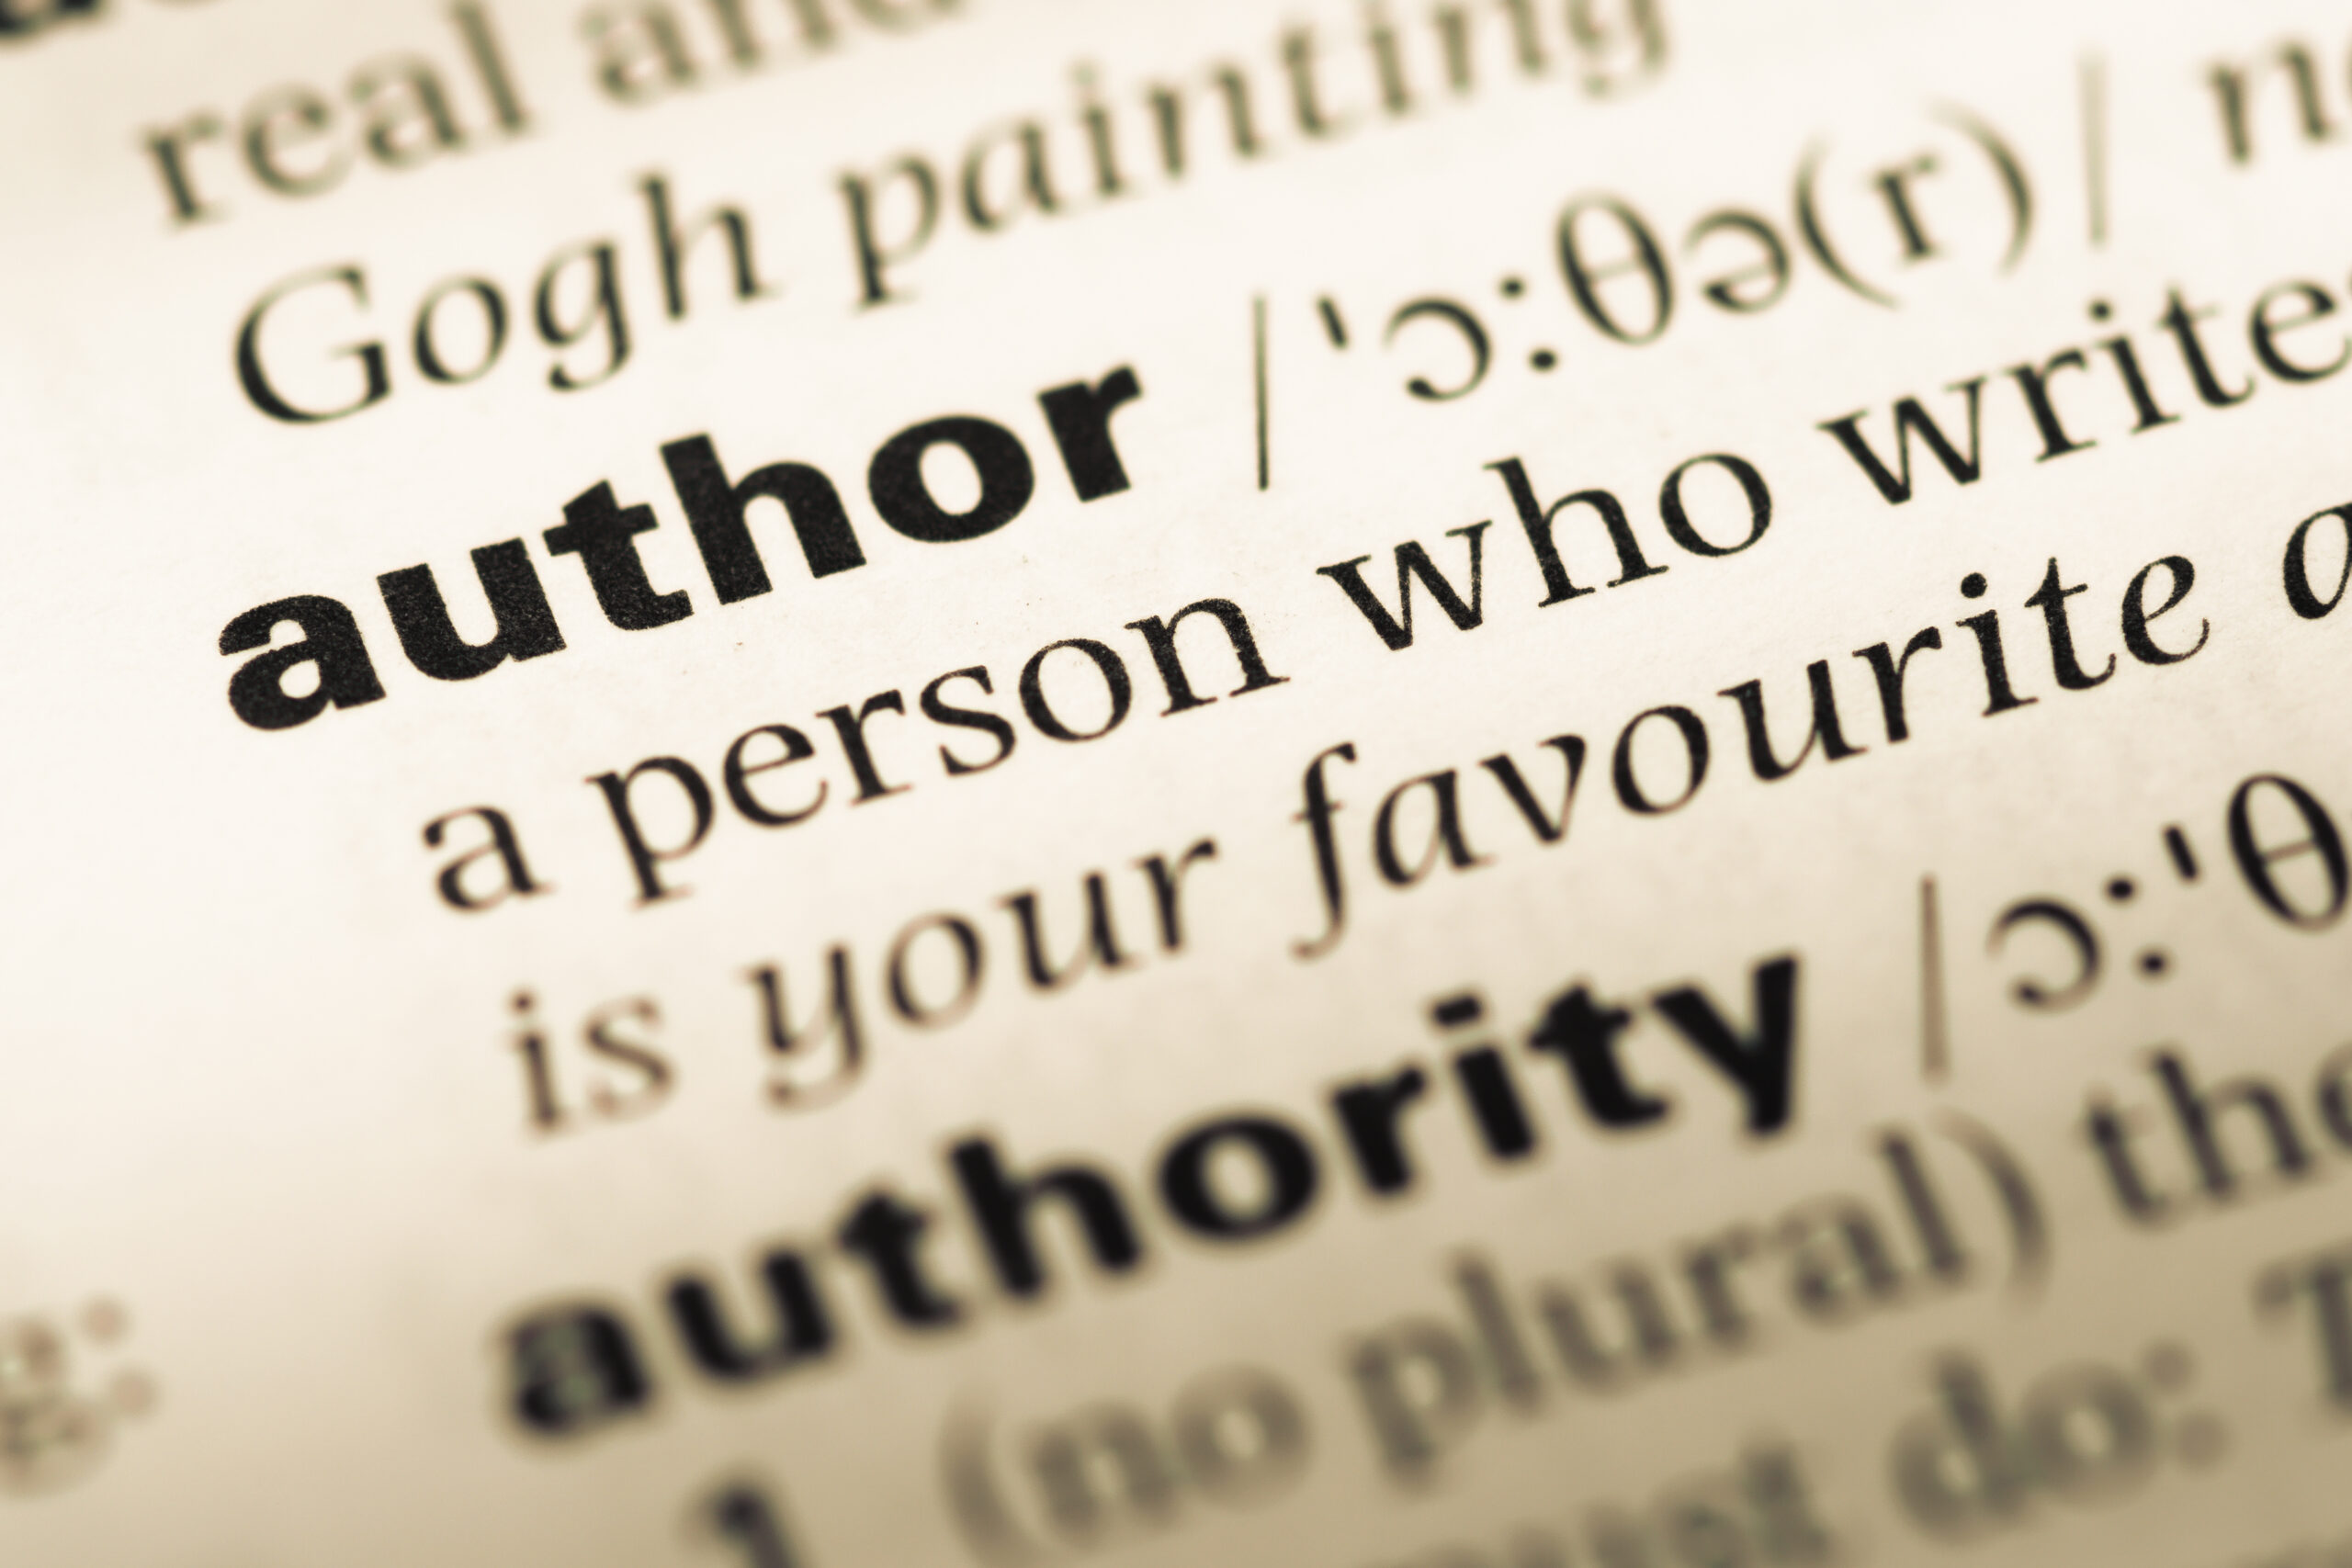 AUTHOR entry in dictionary